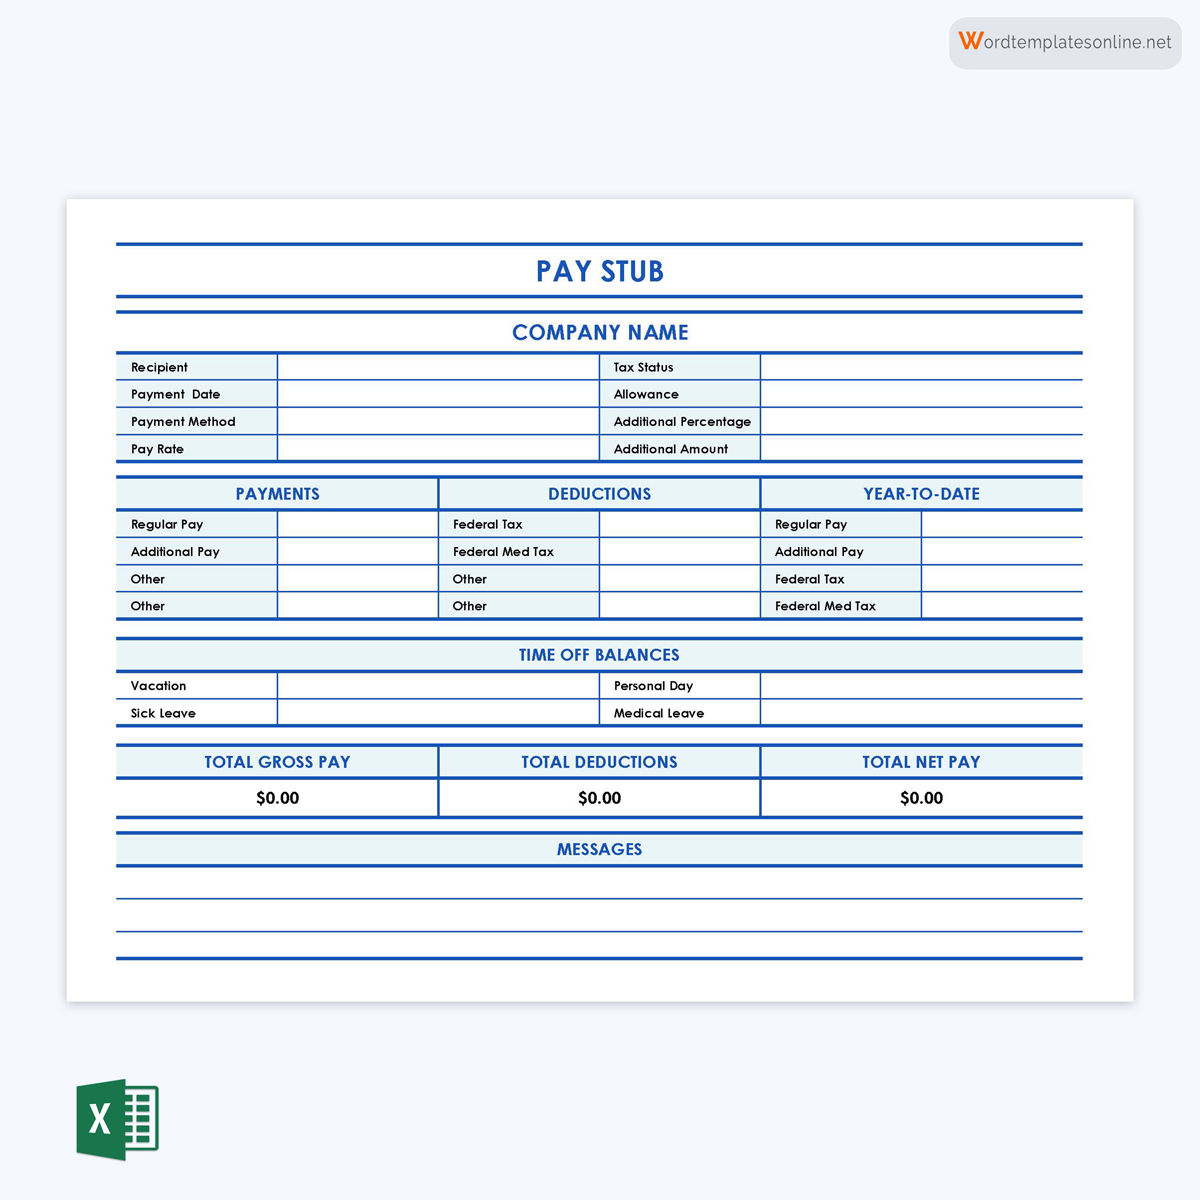 Free Customizable Pay Stub Template 02 as Excel Sheet